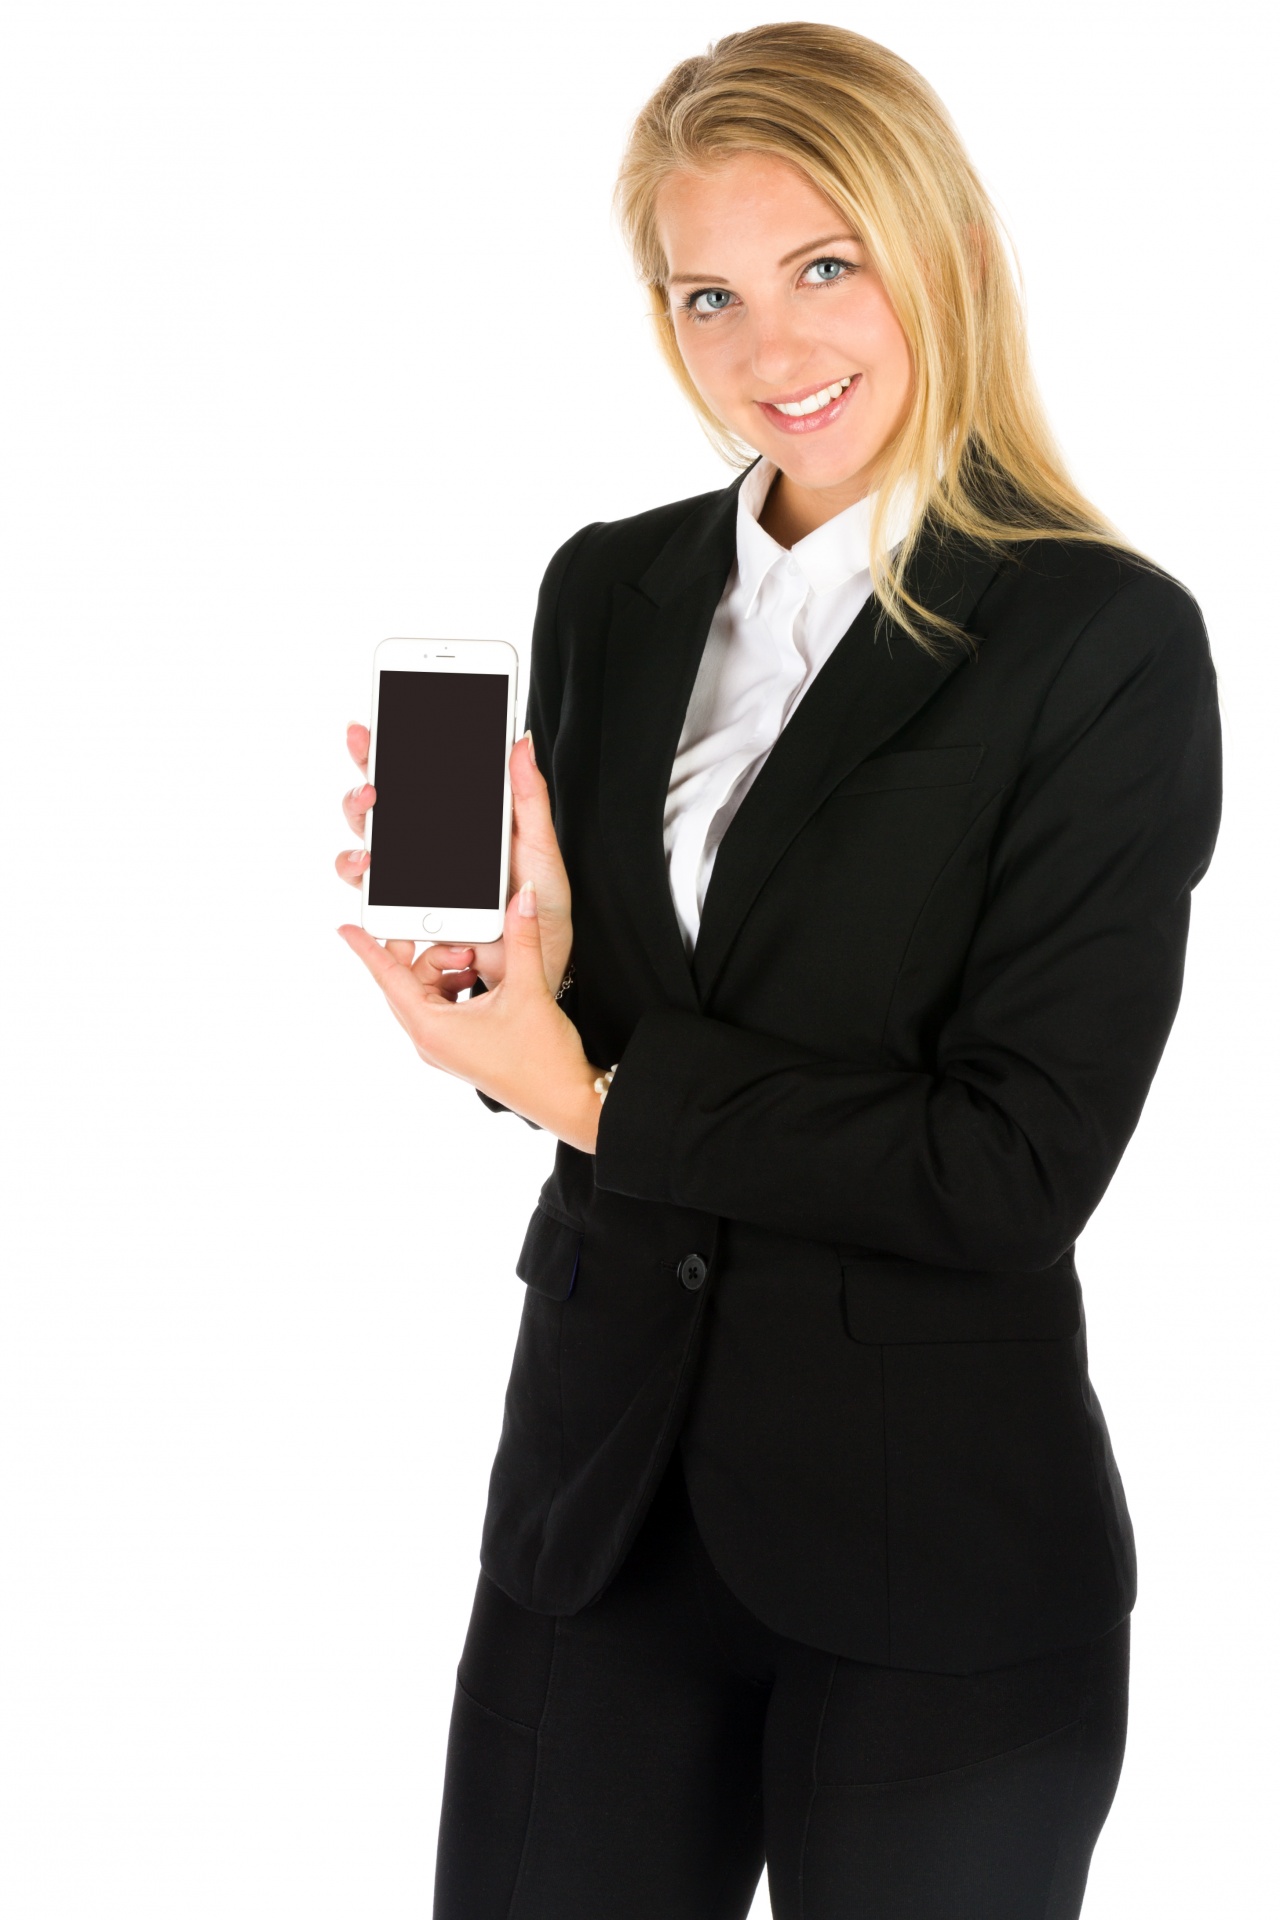 https://www.publicdomainpictures.net/pictures/190000/velka/business-woman-and-the-phone-1470385559CYq.jpg